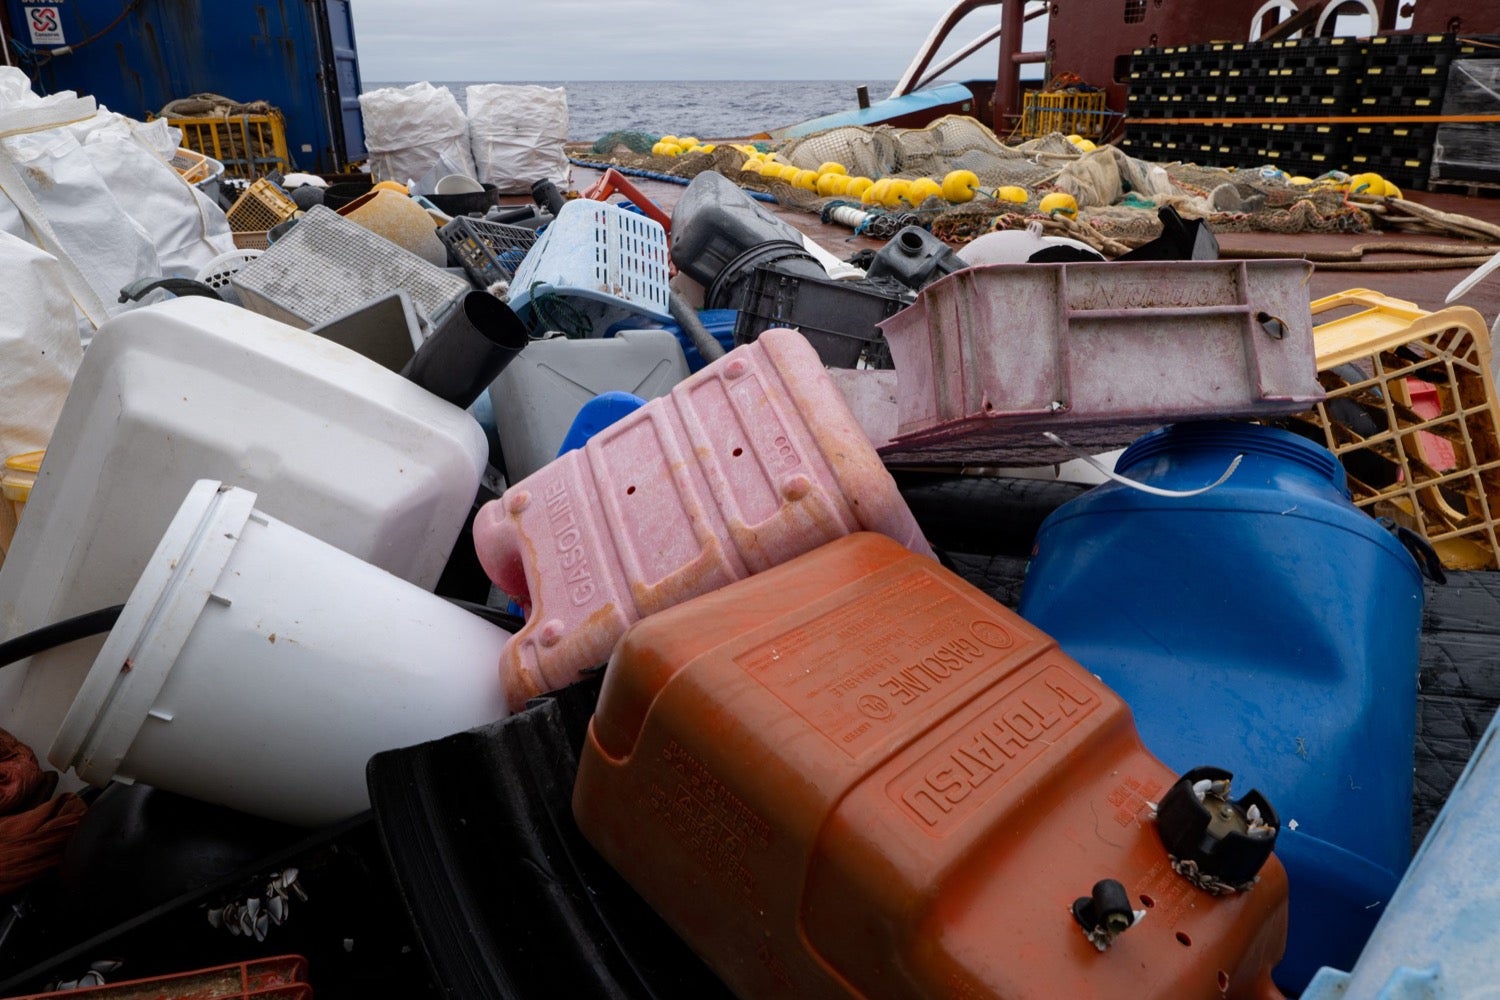 a pile of plastic boxes, petrol cans and other rubbish